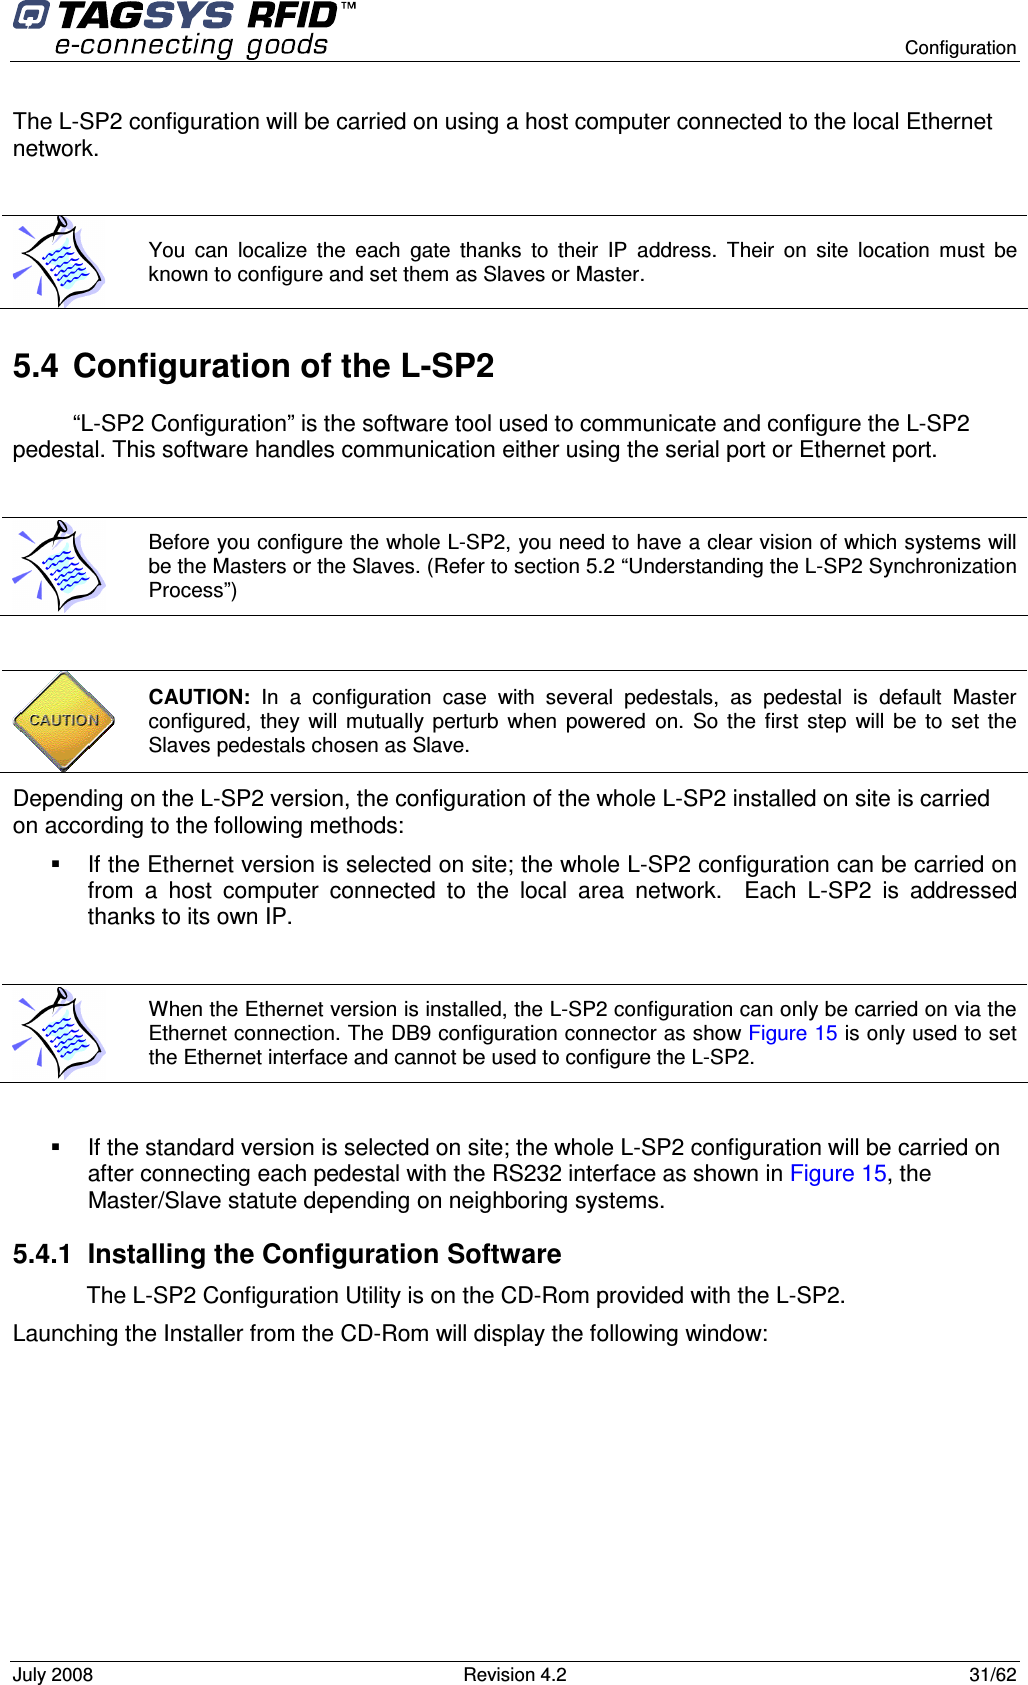      Configuration July 2008  Revision 4.2  31/62 The L-SP2 configuration will be carried on using a host computer connected to the local Ethernet network.  5.4  Configuration of the L-SP2 “L-SP2 Configuration” is the software tool used to communicate and configure the L-SP2 pedestal. This software handles communication either using the serial port or Ethernet port.   Depending on the L-SP2 version, the configuration of the whole L-SP2 installed on site is carried on according to the following methods:   If the Ethernet version is selected on site; the whole L-SP2 configuration can be carried on from  a  host  computer  connected  to  the  local  area  network.    Each  L-SP2  is  addressed thanks to its own IP.     If the standard version is selected on site; the whole L-SP2 configuration will be carried on after connecting each pedestal with the RS232 interface as shown in Figure 15, the Master/Slave statute depending on neighboring systems. 5.4.1  Installing the Configuration Software The L-SP2 Configuration Utility is on the CD-Rom provided with the L-SP2. Launching the Installer from the CD-Rom will display the following window:  You  can  localize  the  each  gate  thanks  to  their  IP  address.  Their  on  site  location  must  be known to configure and set them as Slaves or Master.  Before you configure the whole L-SP2, you need to have a clear vision of which systems will be the Masters or the Slaves. (Refer to section 5.2 “Understanding the L-SP2 Synchronization Process”)  CAUTION:  In  a  configuration  case  with  several  pedestals,  as  pedestal  is  default  Master configured,  they  will  mutually  perturb  when  powered  on.  So  the  first  step  will  be  to  set  the Slaves pedestals chosen as Slave.  When the Ethernet version is installed, the L-SP2 configuration can only be carried on via the Ethernet connection. The DB9 configuration connector as show Figure 15 is only used to set the Ethernet interface and cannot be used to configure the L-SP2. 